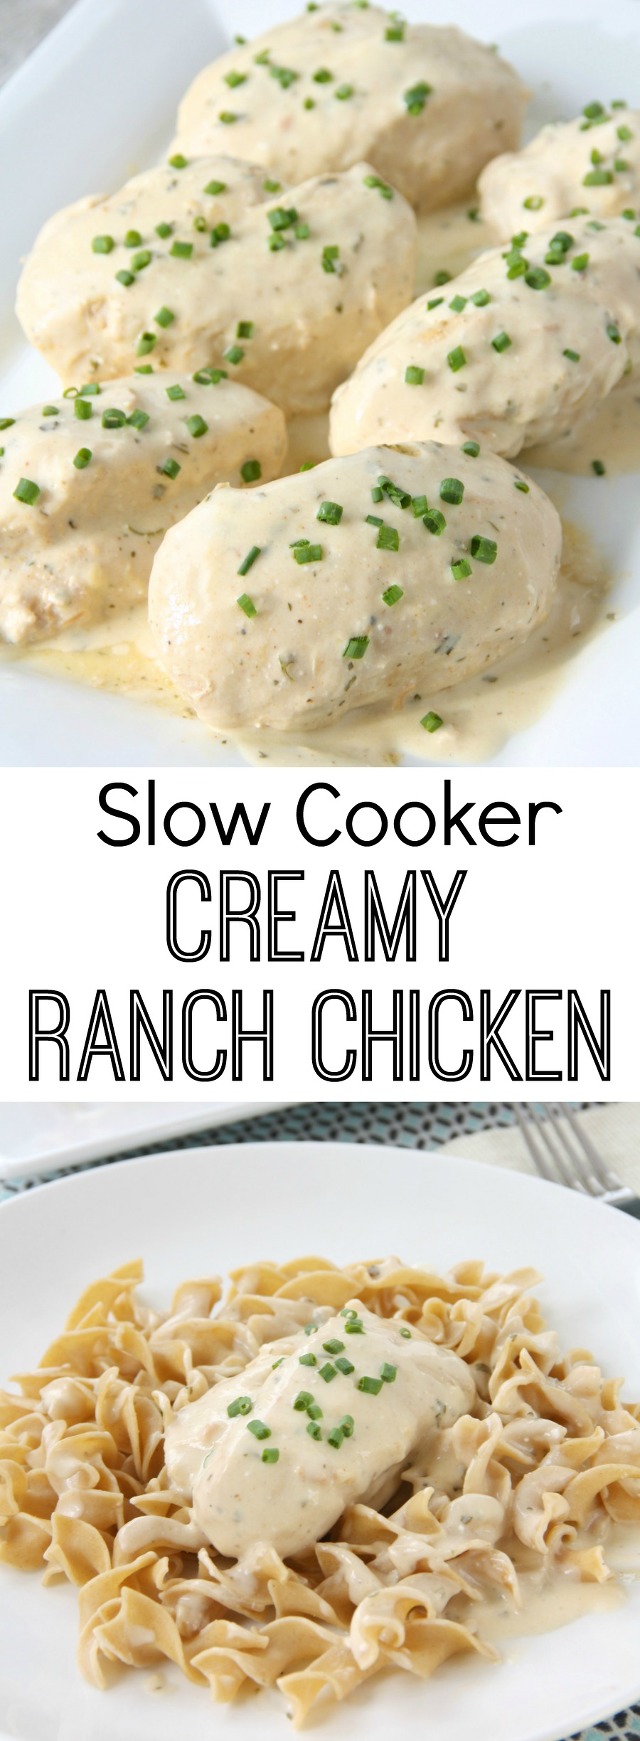 Slow Cooker Creamy Ranch Chicken - My Mommy Style